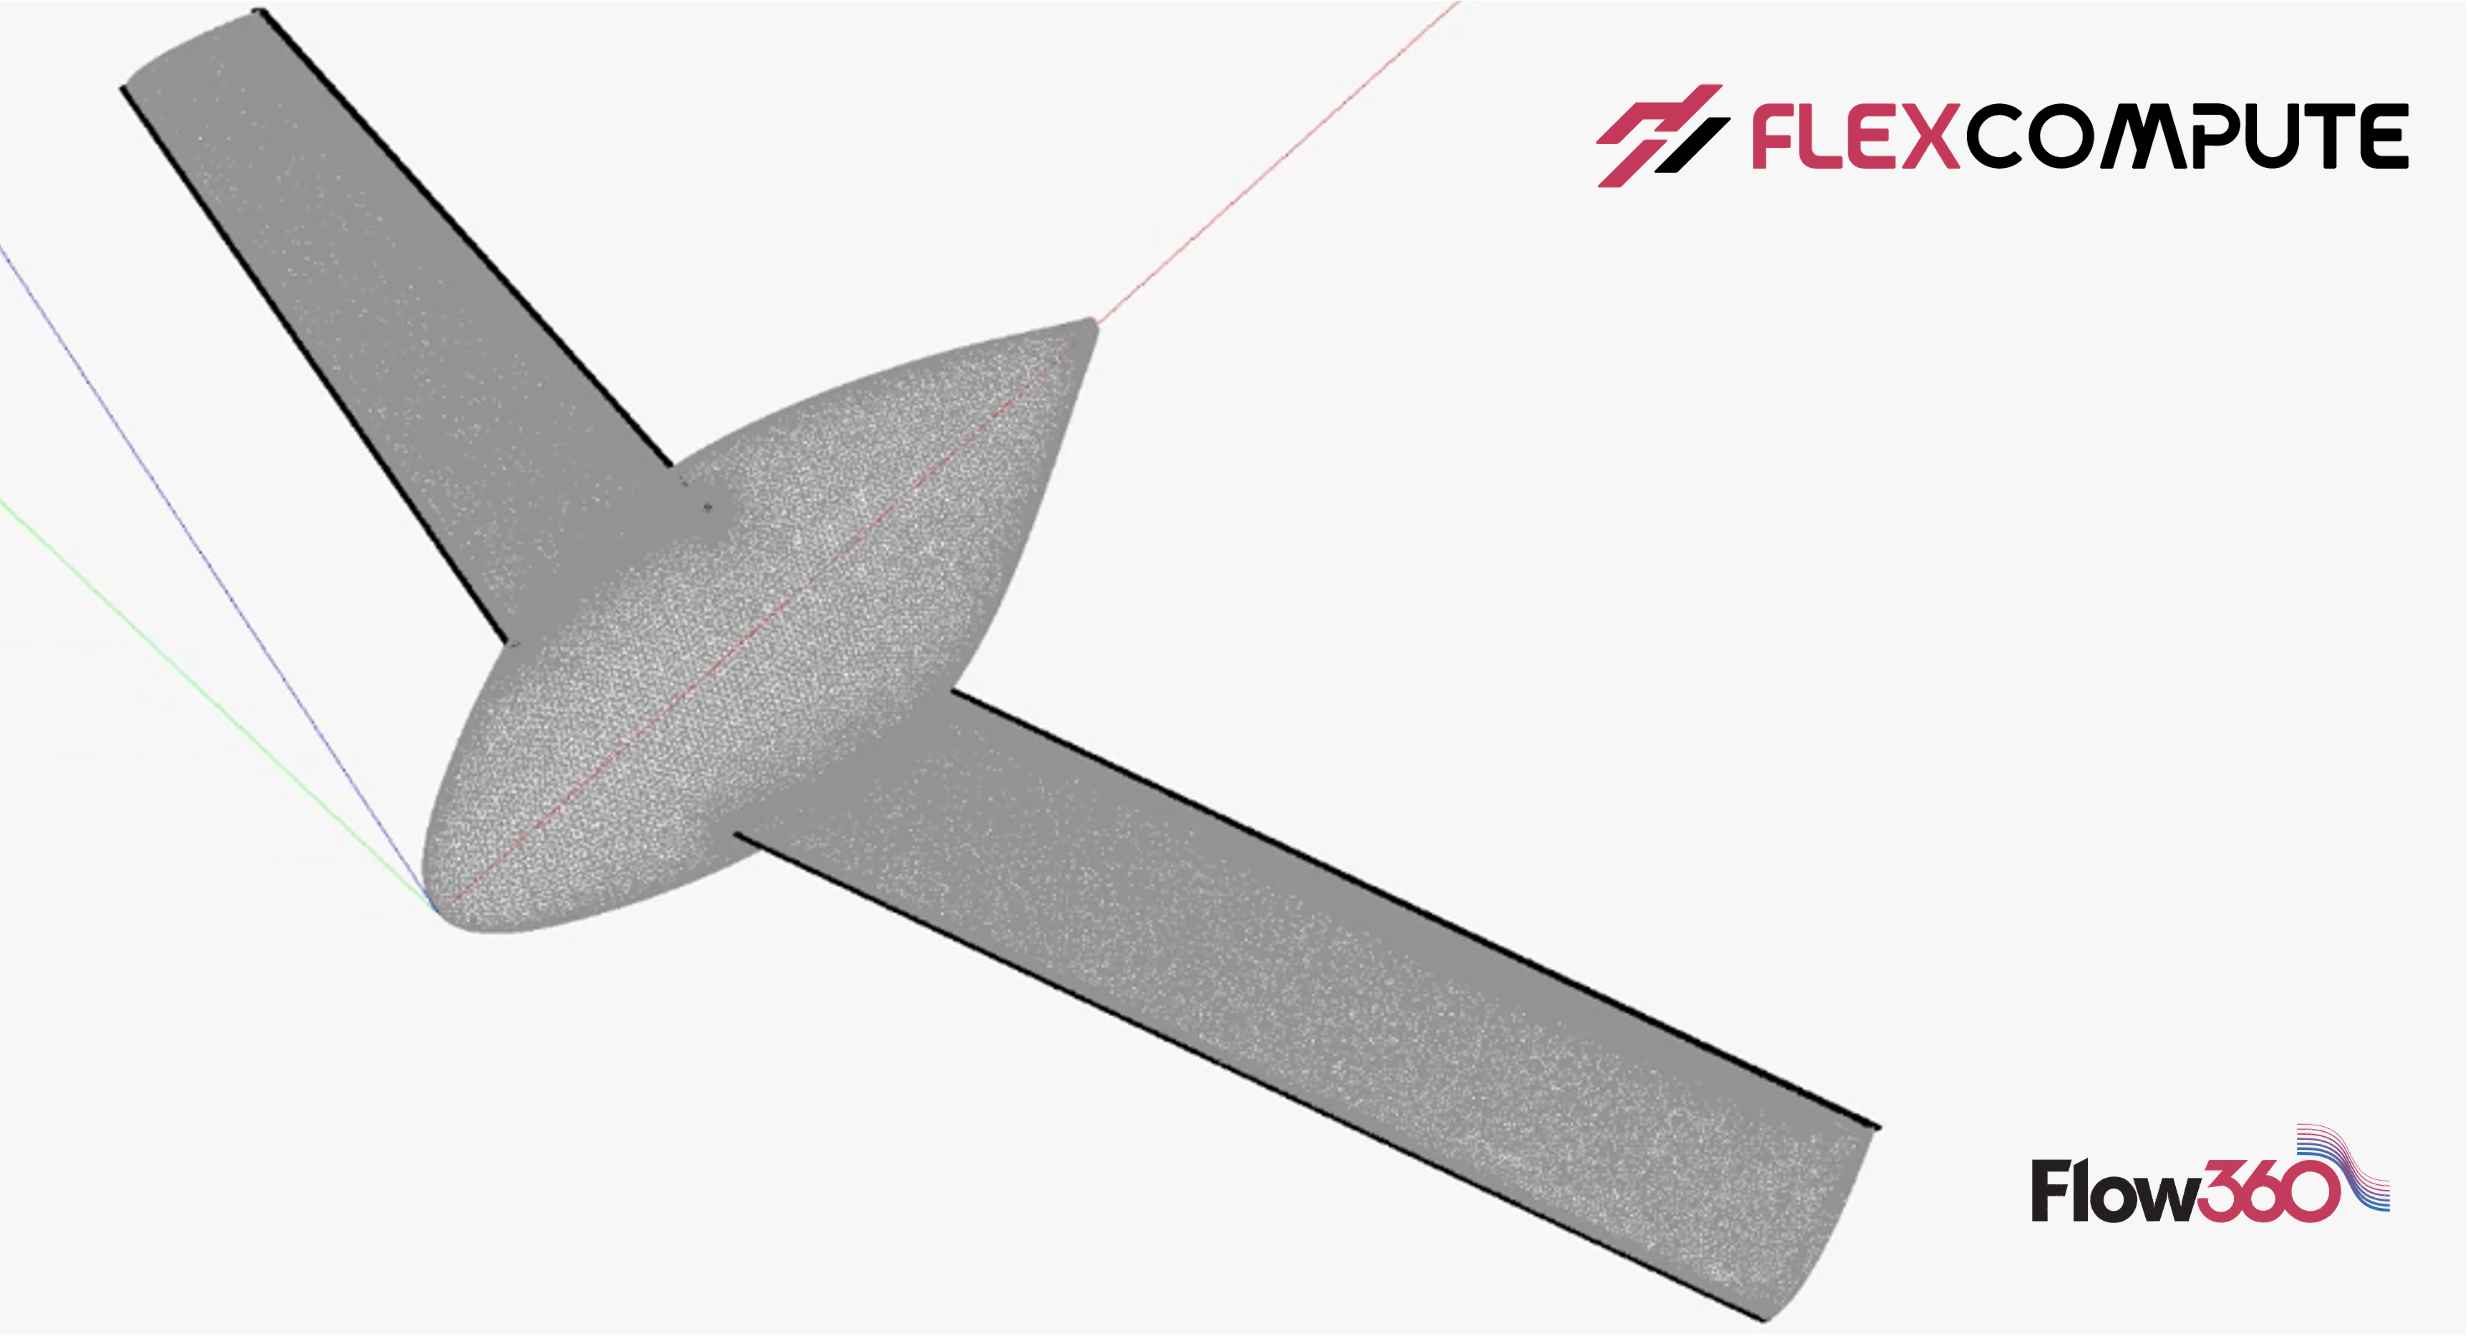 Lecture 3: How to prepare surface and volume meshes for aircraft CFD simulation